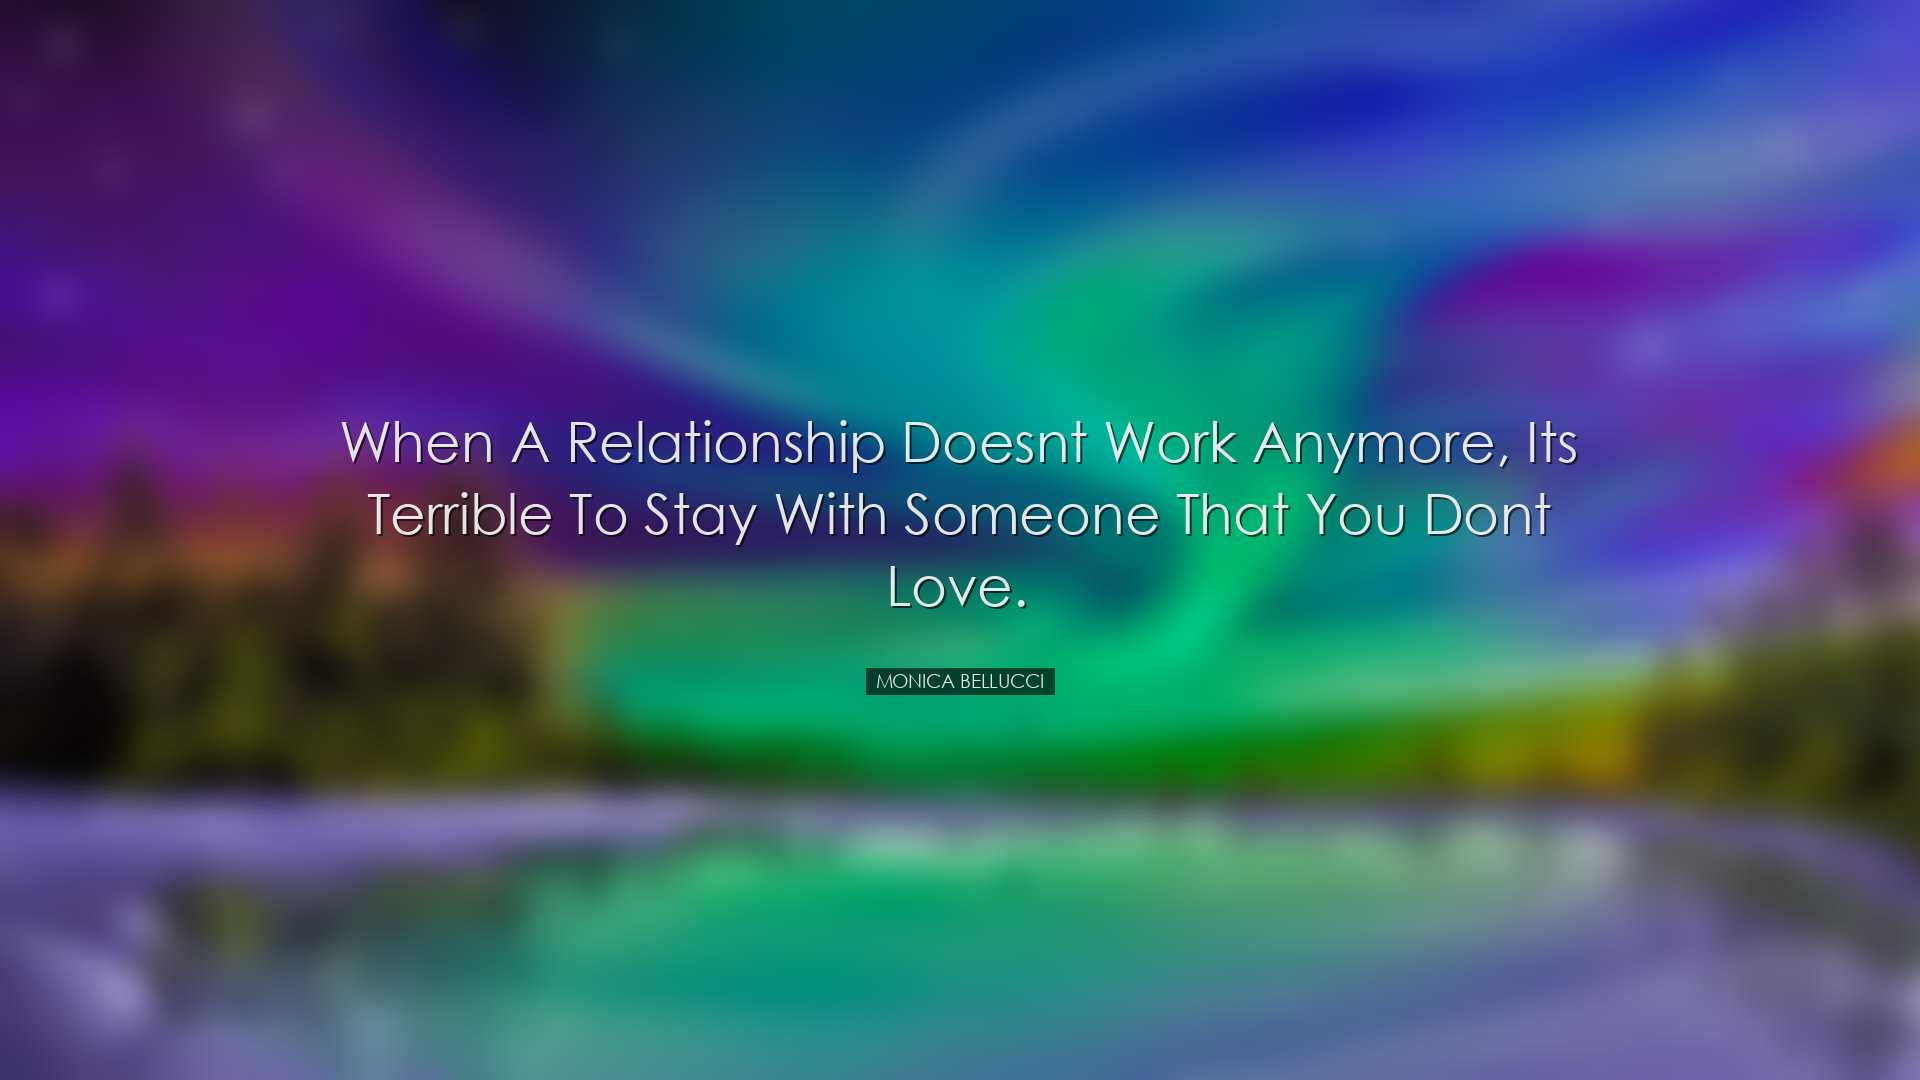 When a relationship doesnt work anymore, its terrible to stay with